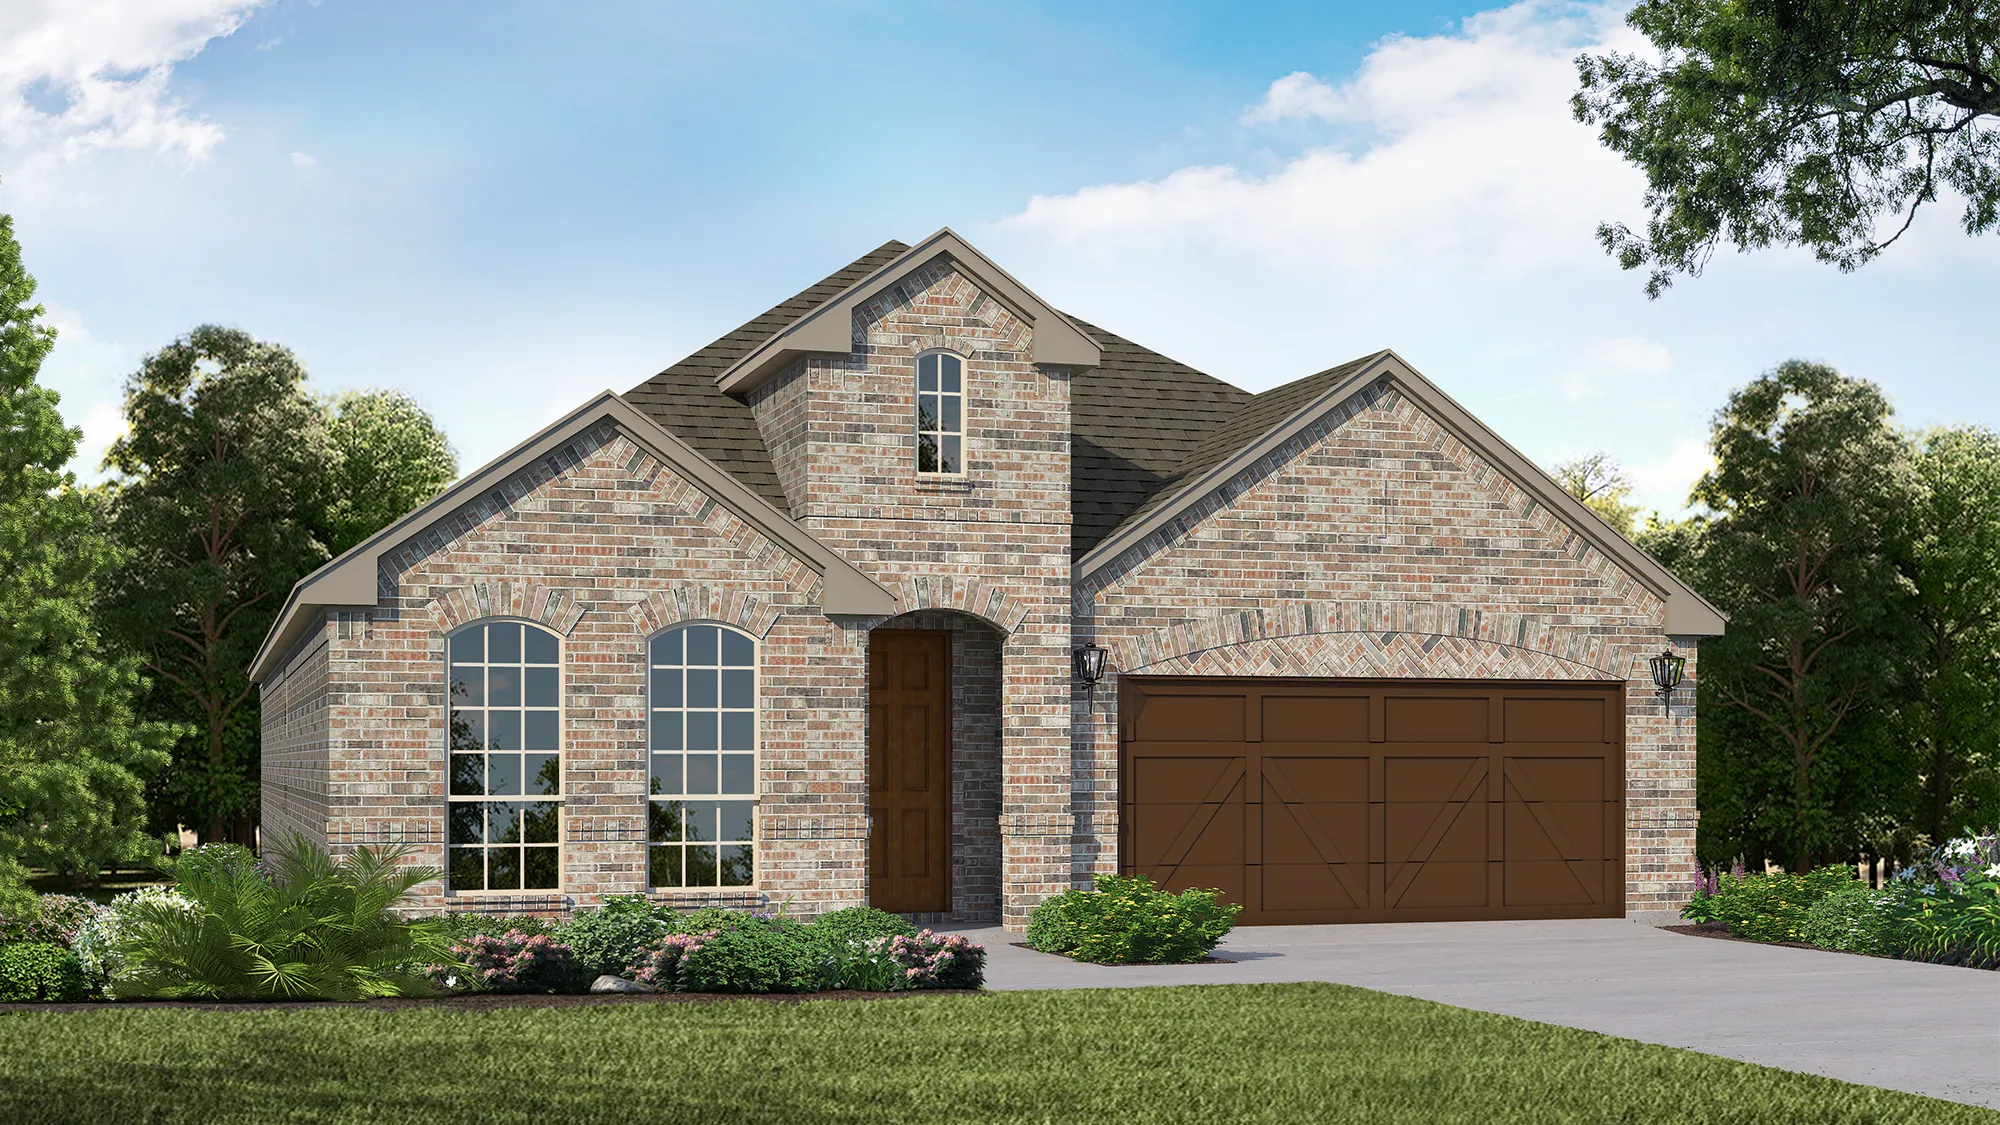 Plan 1519 Elevation A by American Legend Homes